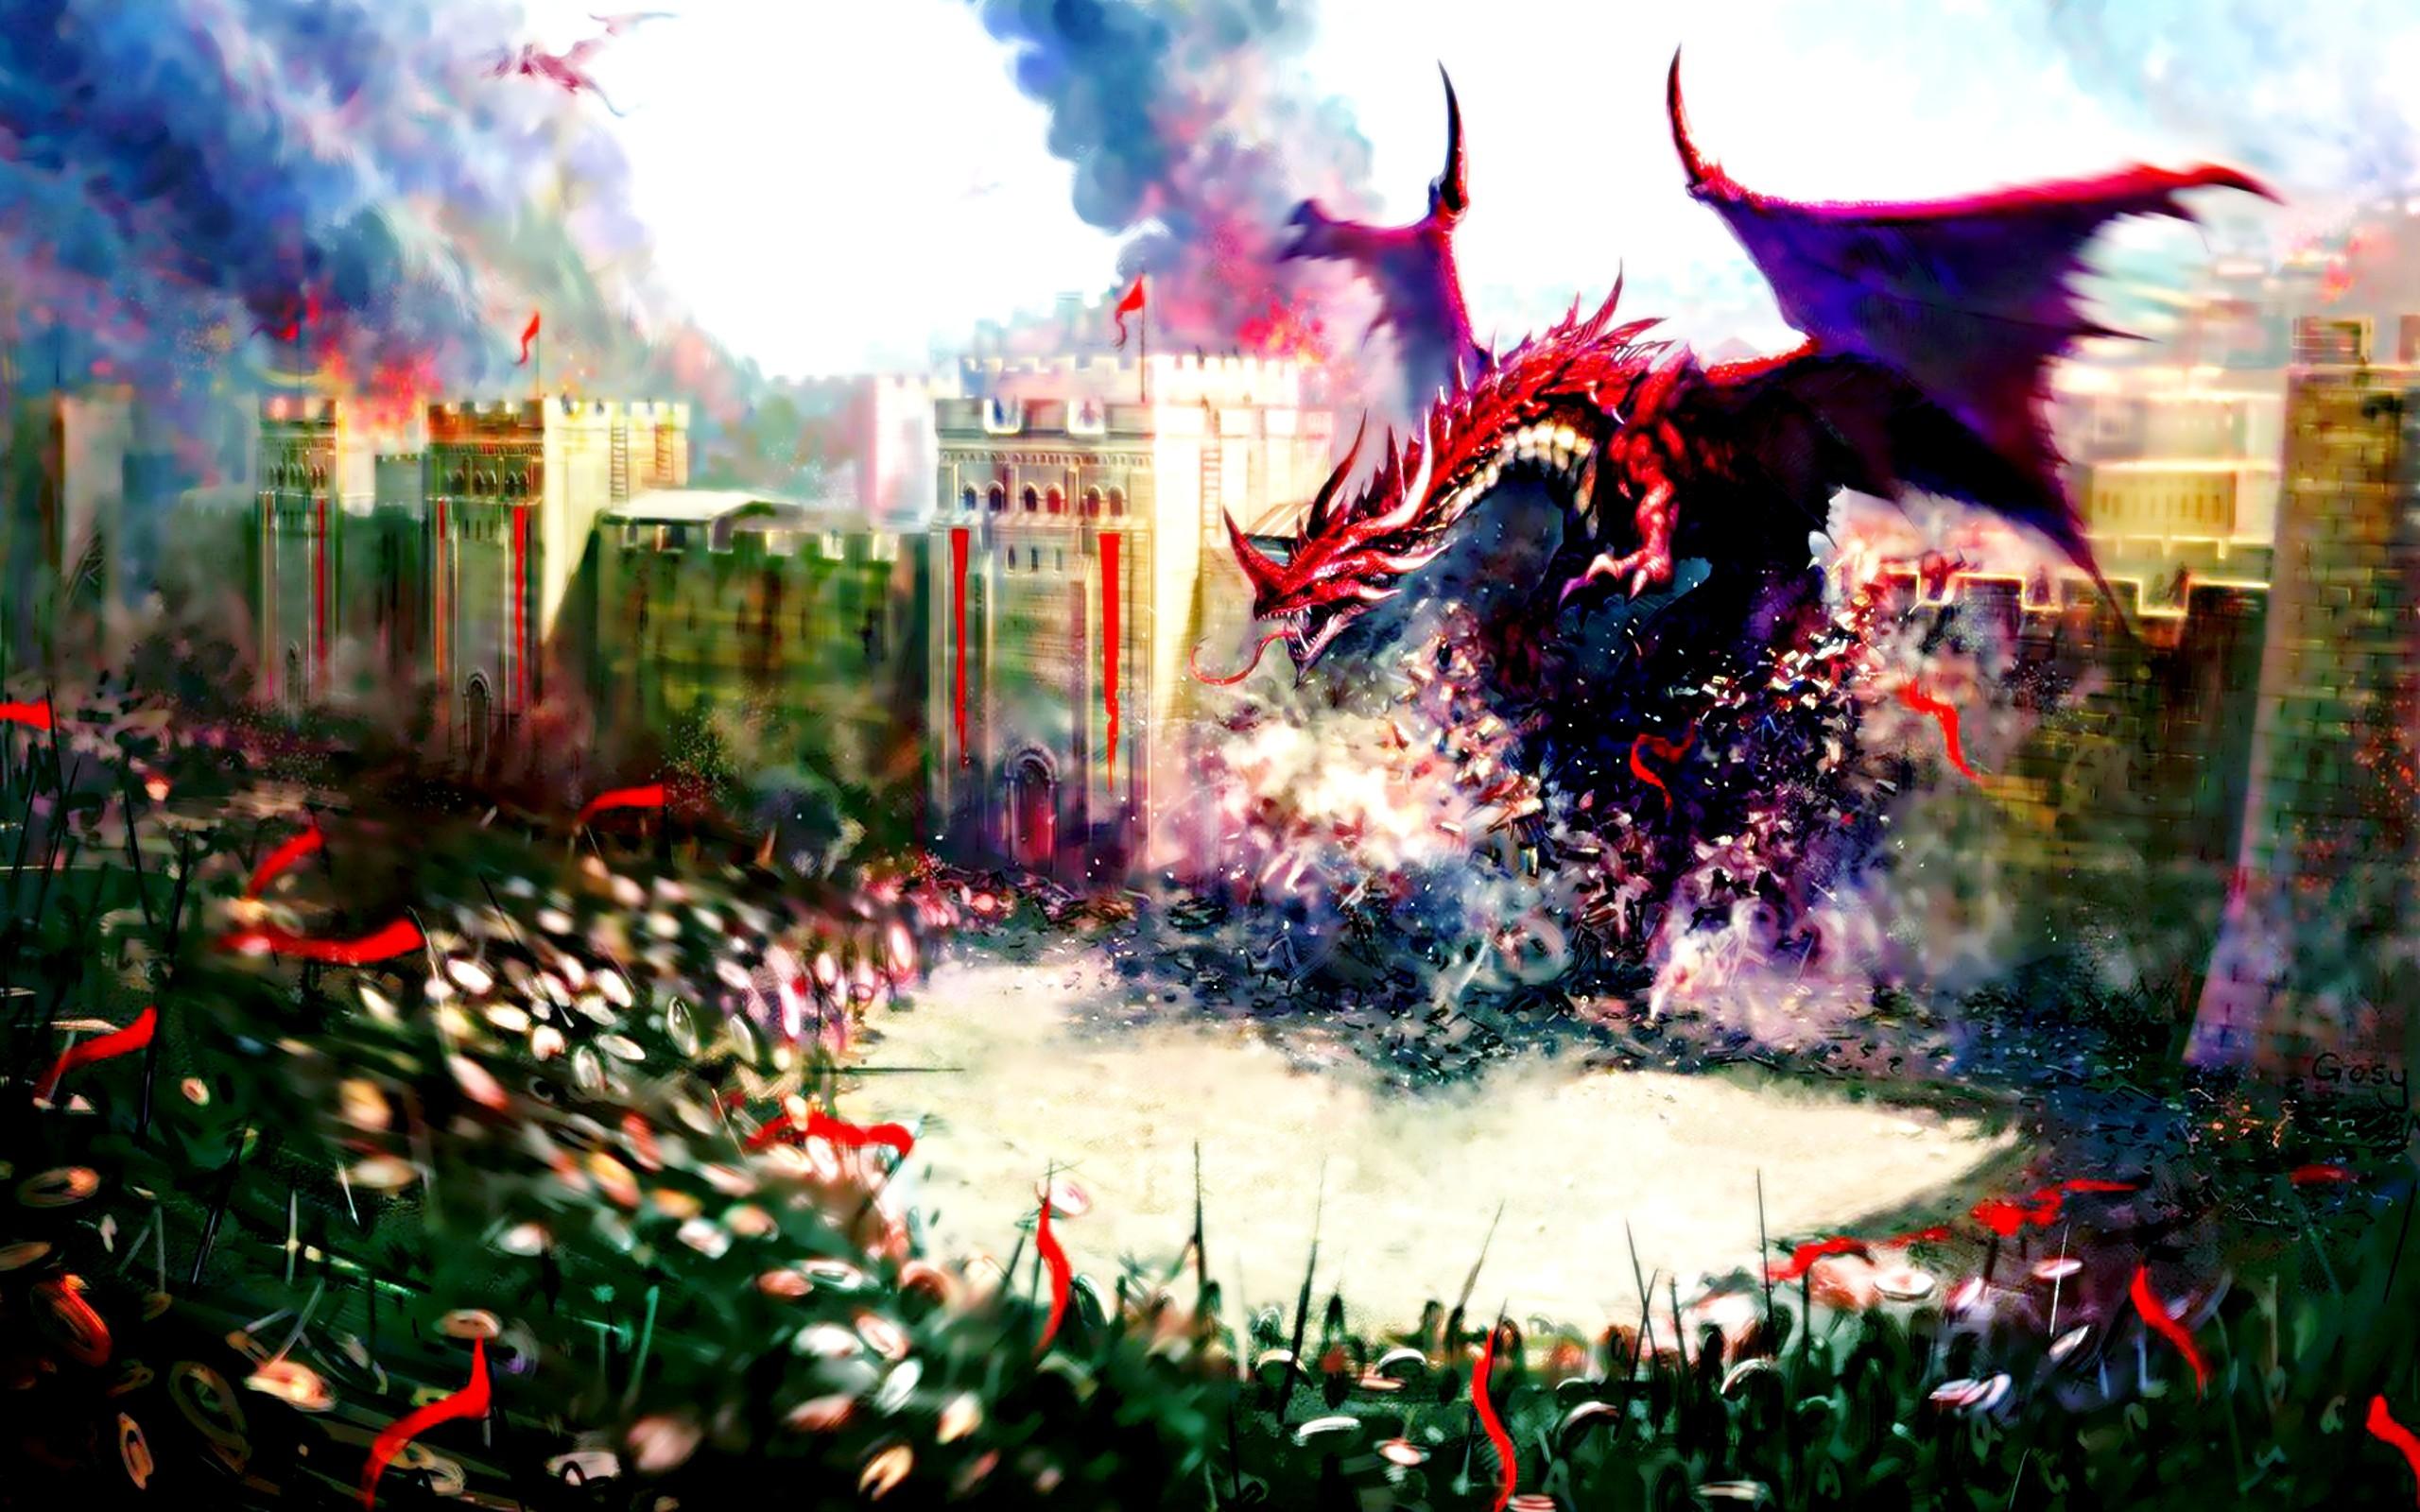 Download the Medieval Dragon Wallpaper, Medieval Dragon iPhone